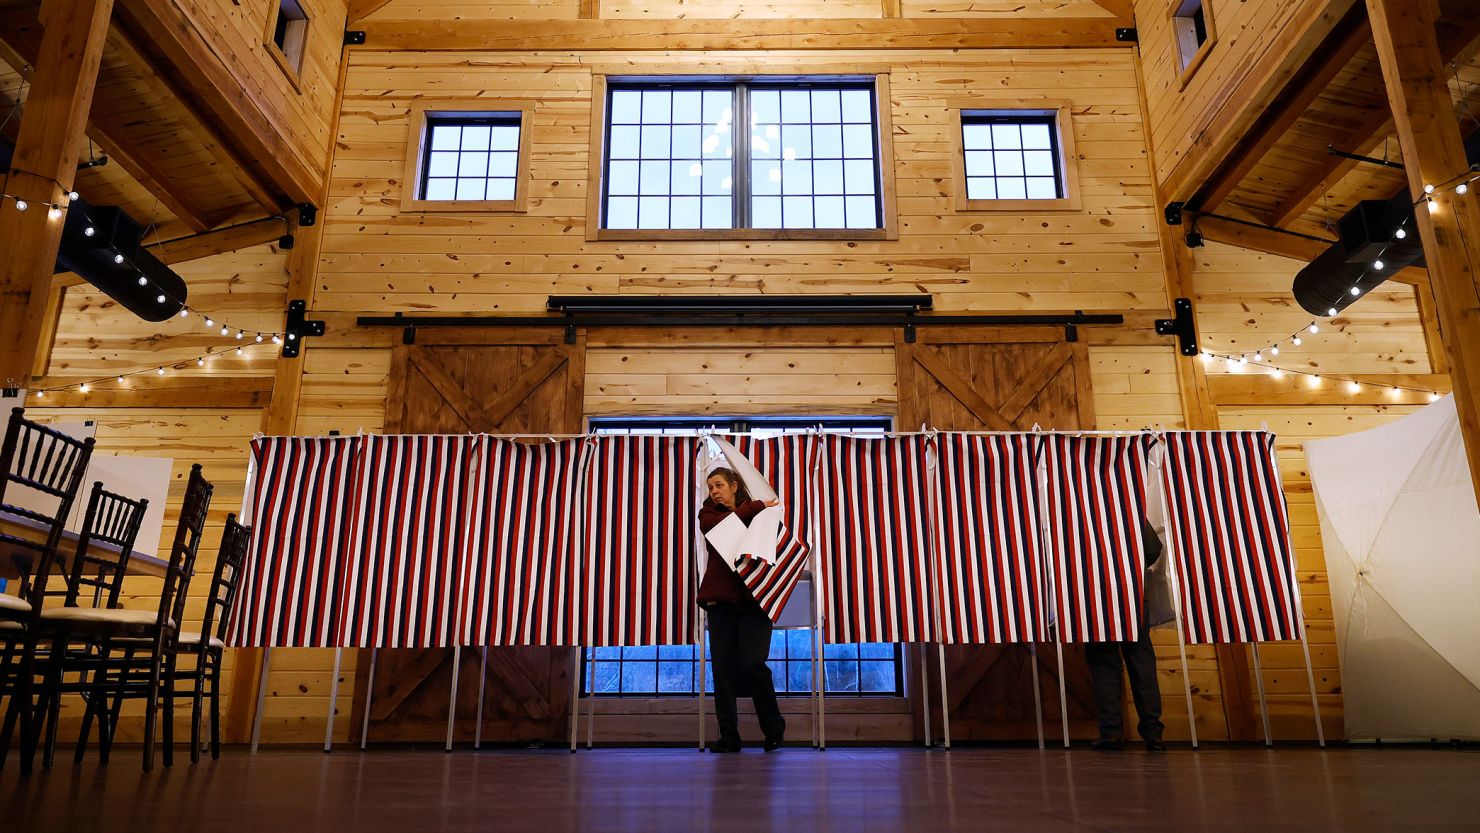 A voter casts her ballot in the New Hampshire presidential primary election at The Barn at Bull Meadow on January 23, 2024, in Concord, New Hampshire.